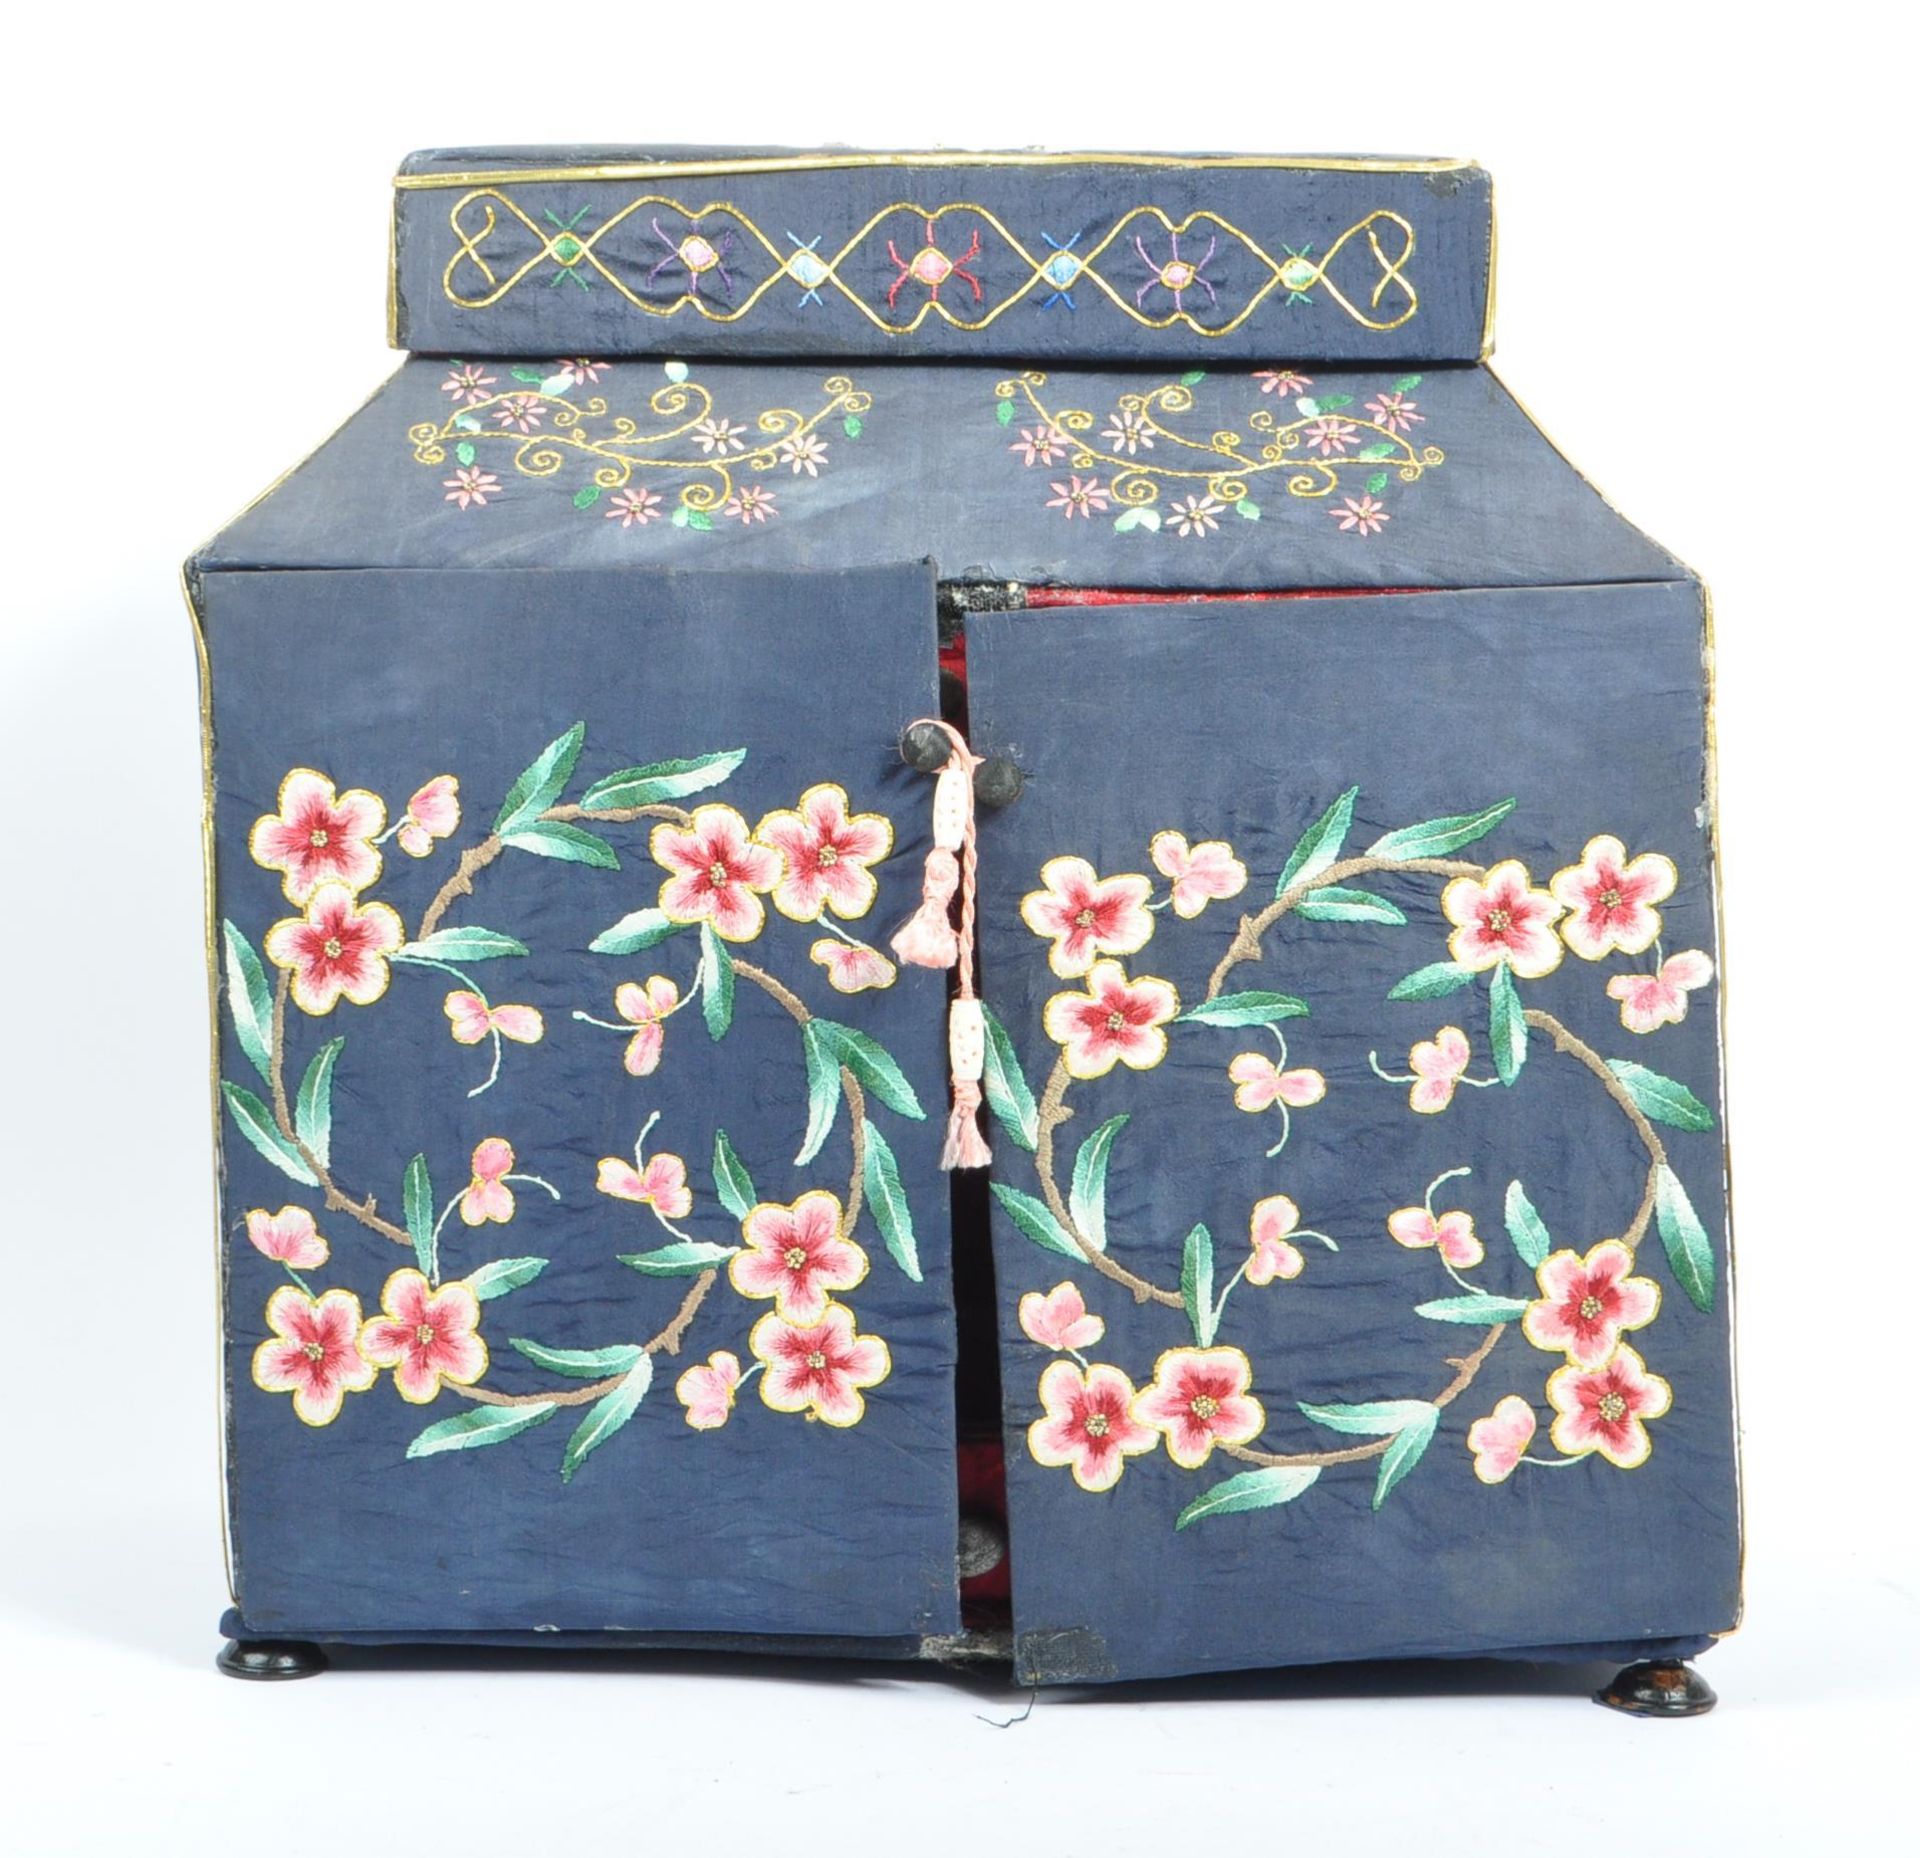 EARLY 20TH CENTURY 1920S CHINESE EMBROIDERED PEKING SEWING BOX